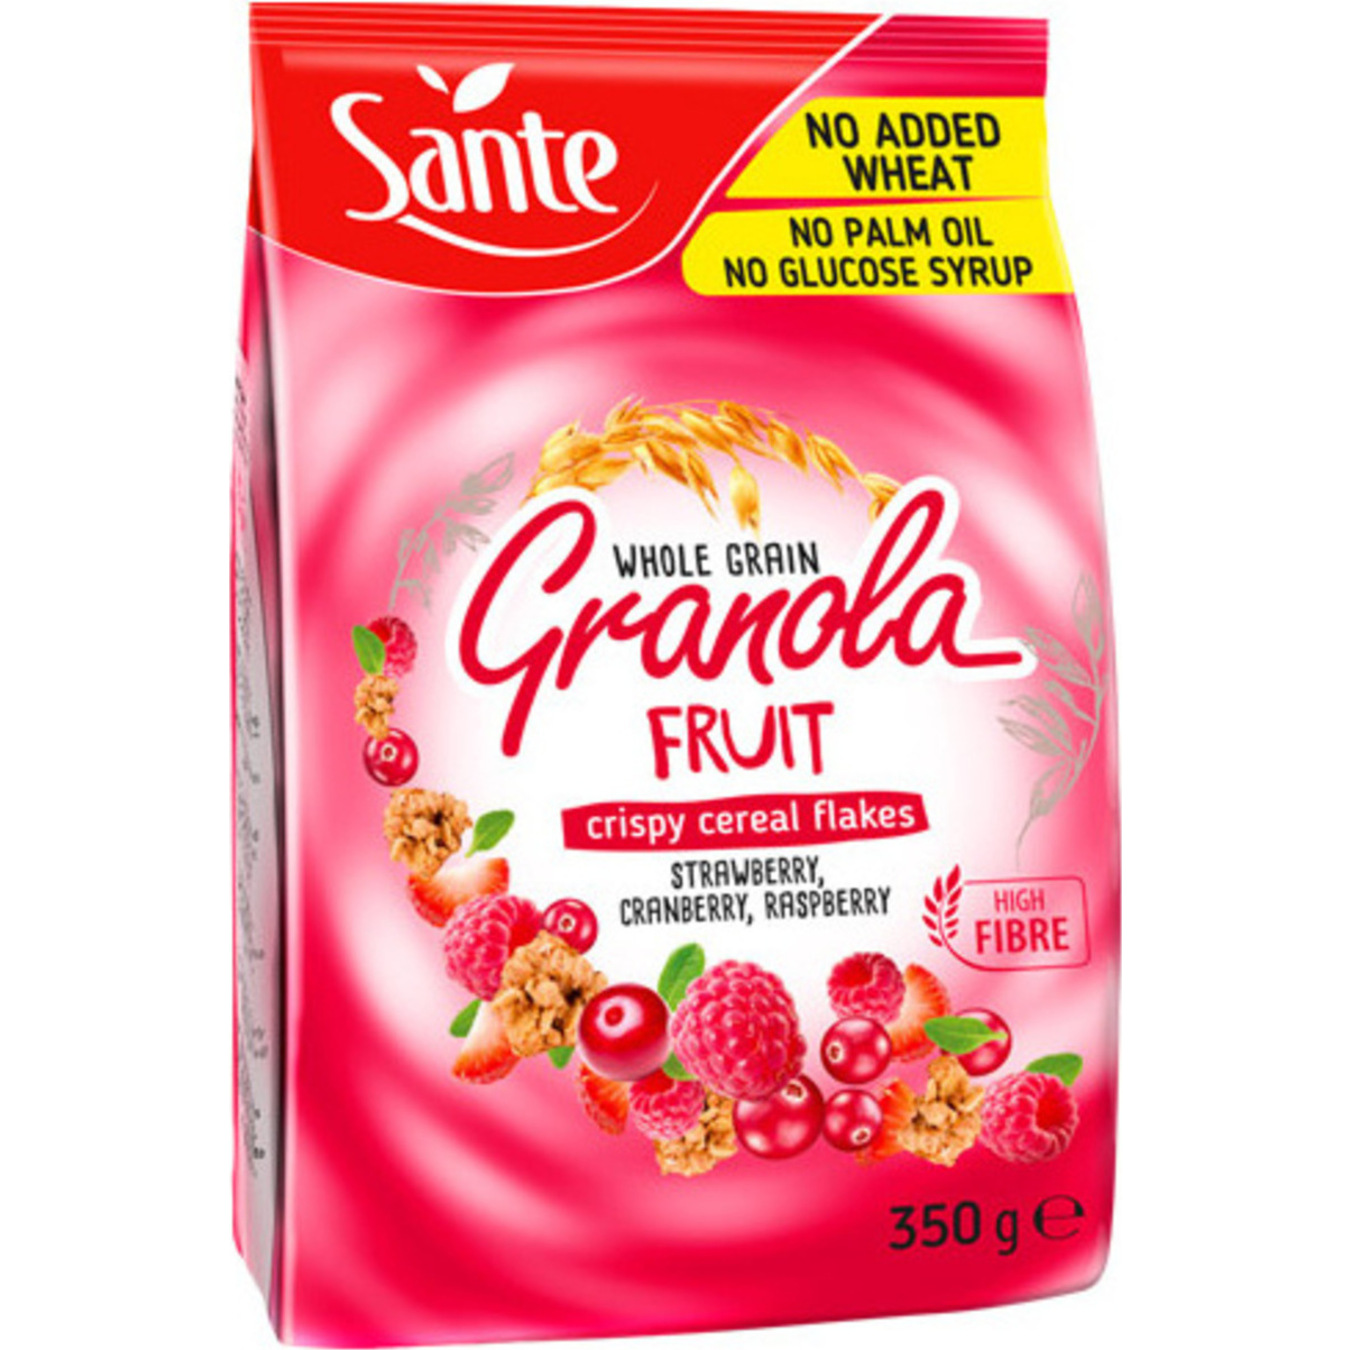 Sante Granola Whole Grain Crispy Cereal Flakes with Strawberry, Cranberry and Raspberry 350g